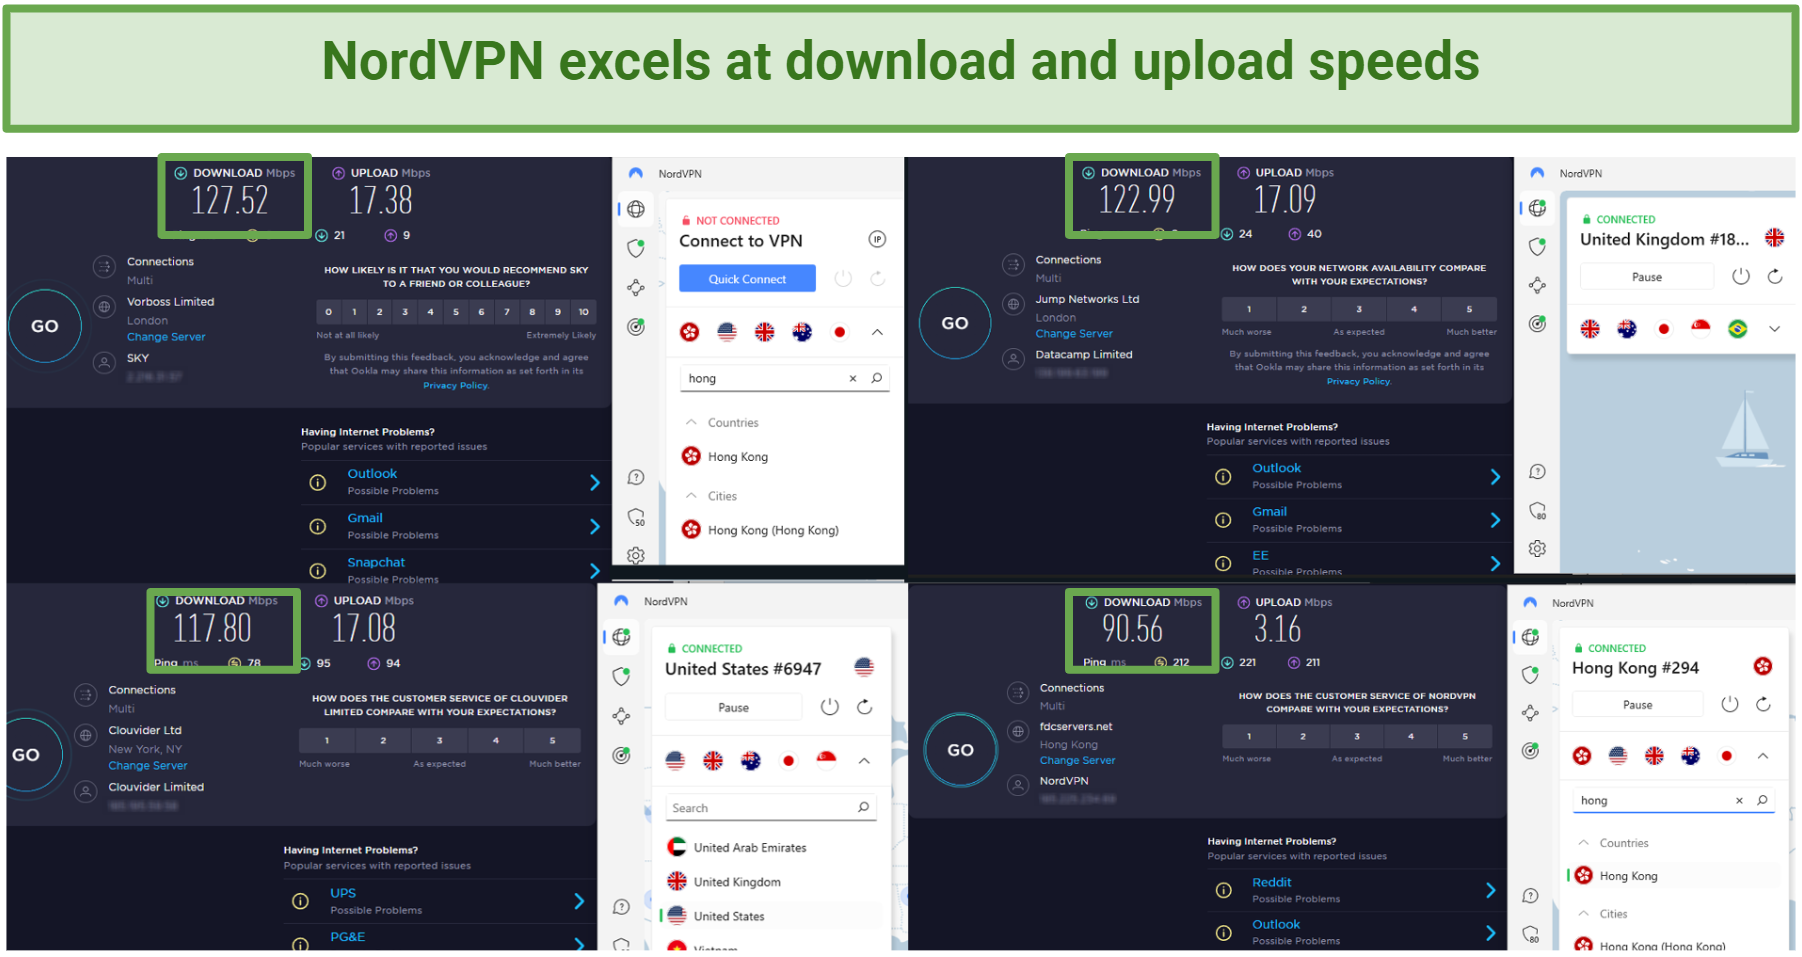 Pictures of NordVPN speed tests in the US, UK, Hong Kong, and closest server